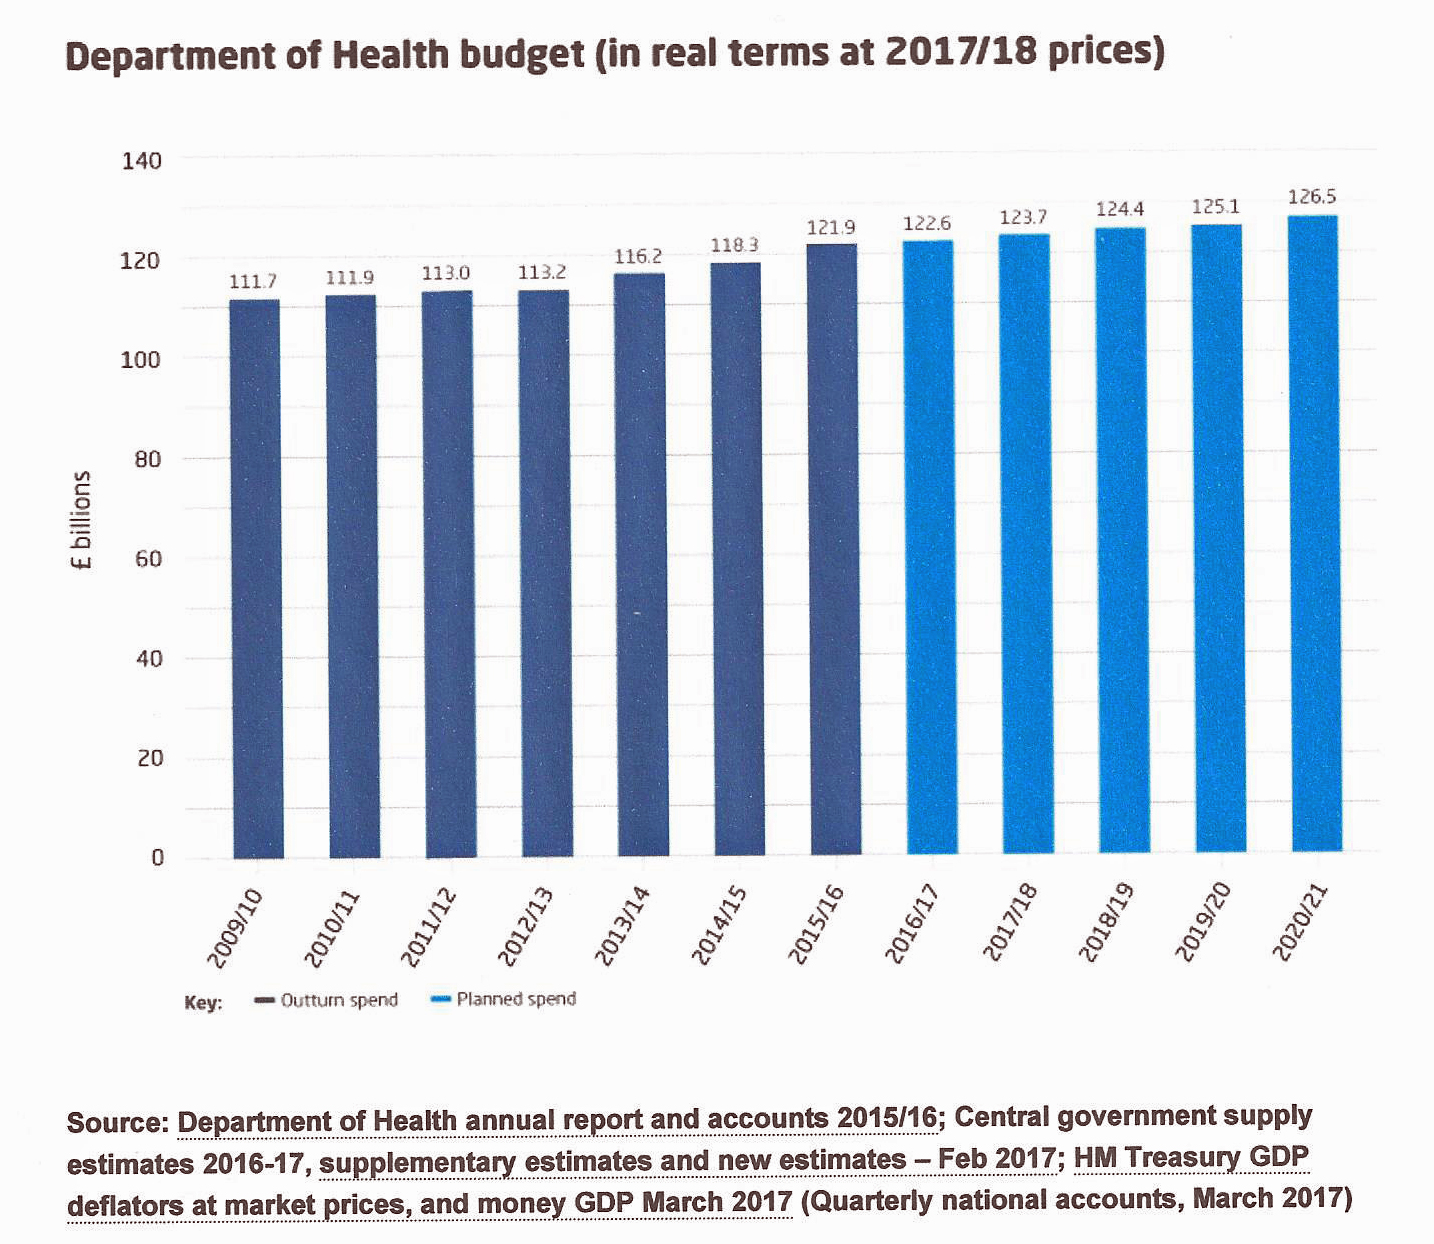 Department of Health budget (in real terms at 2017/18 prices)